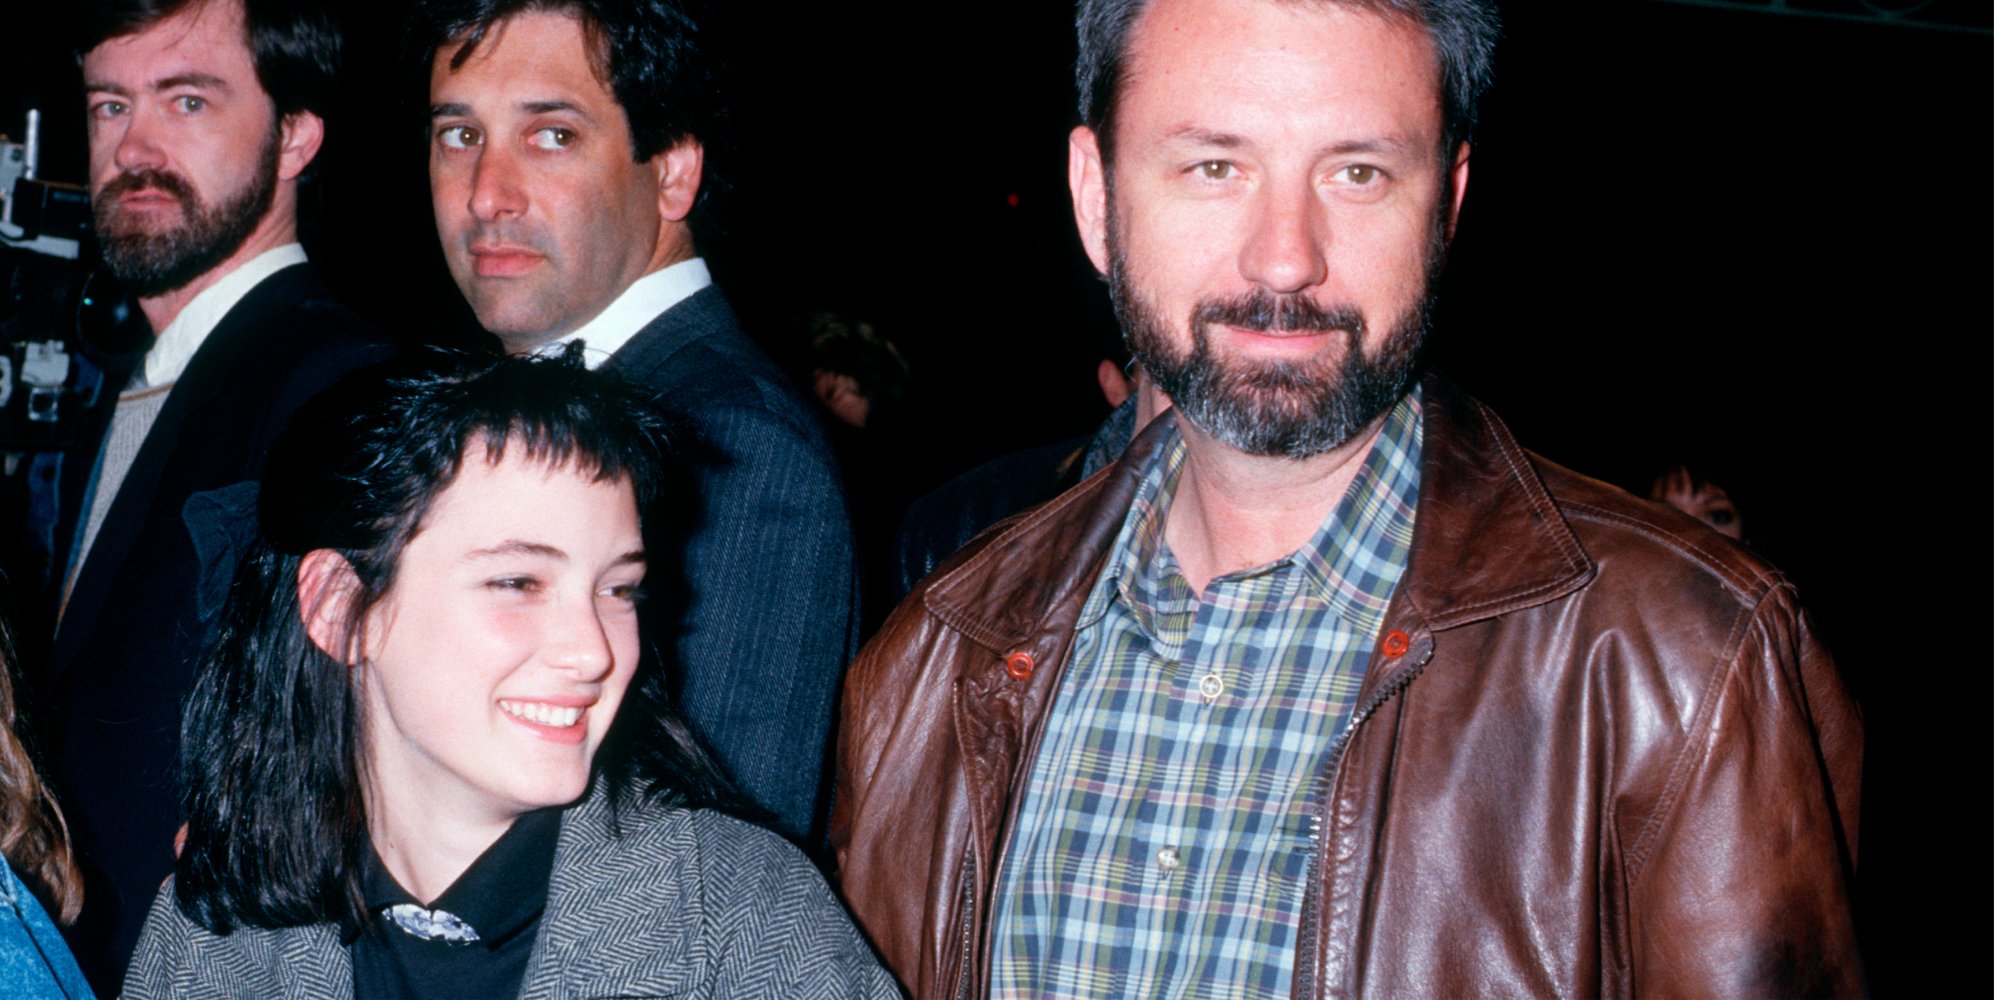 Winona Ryder and Mike Nesmith attend a movie premiere in 1987.